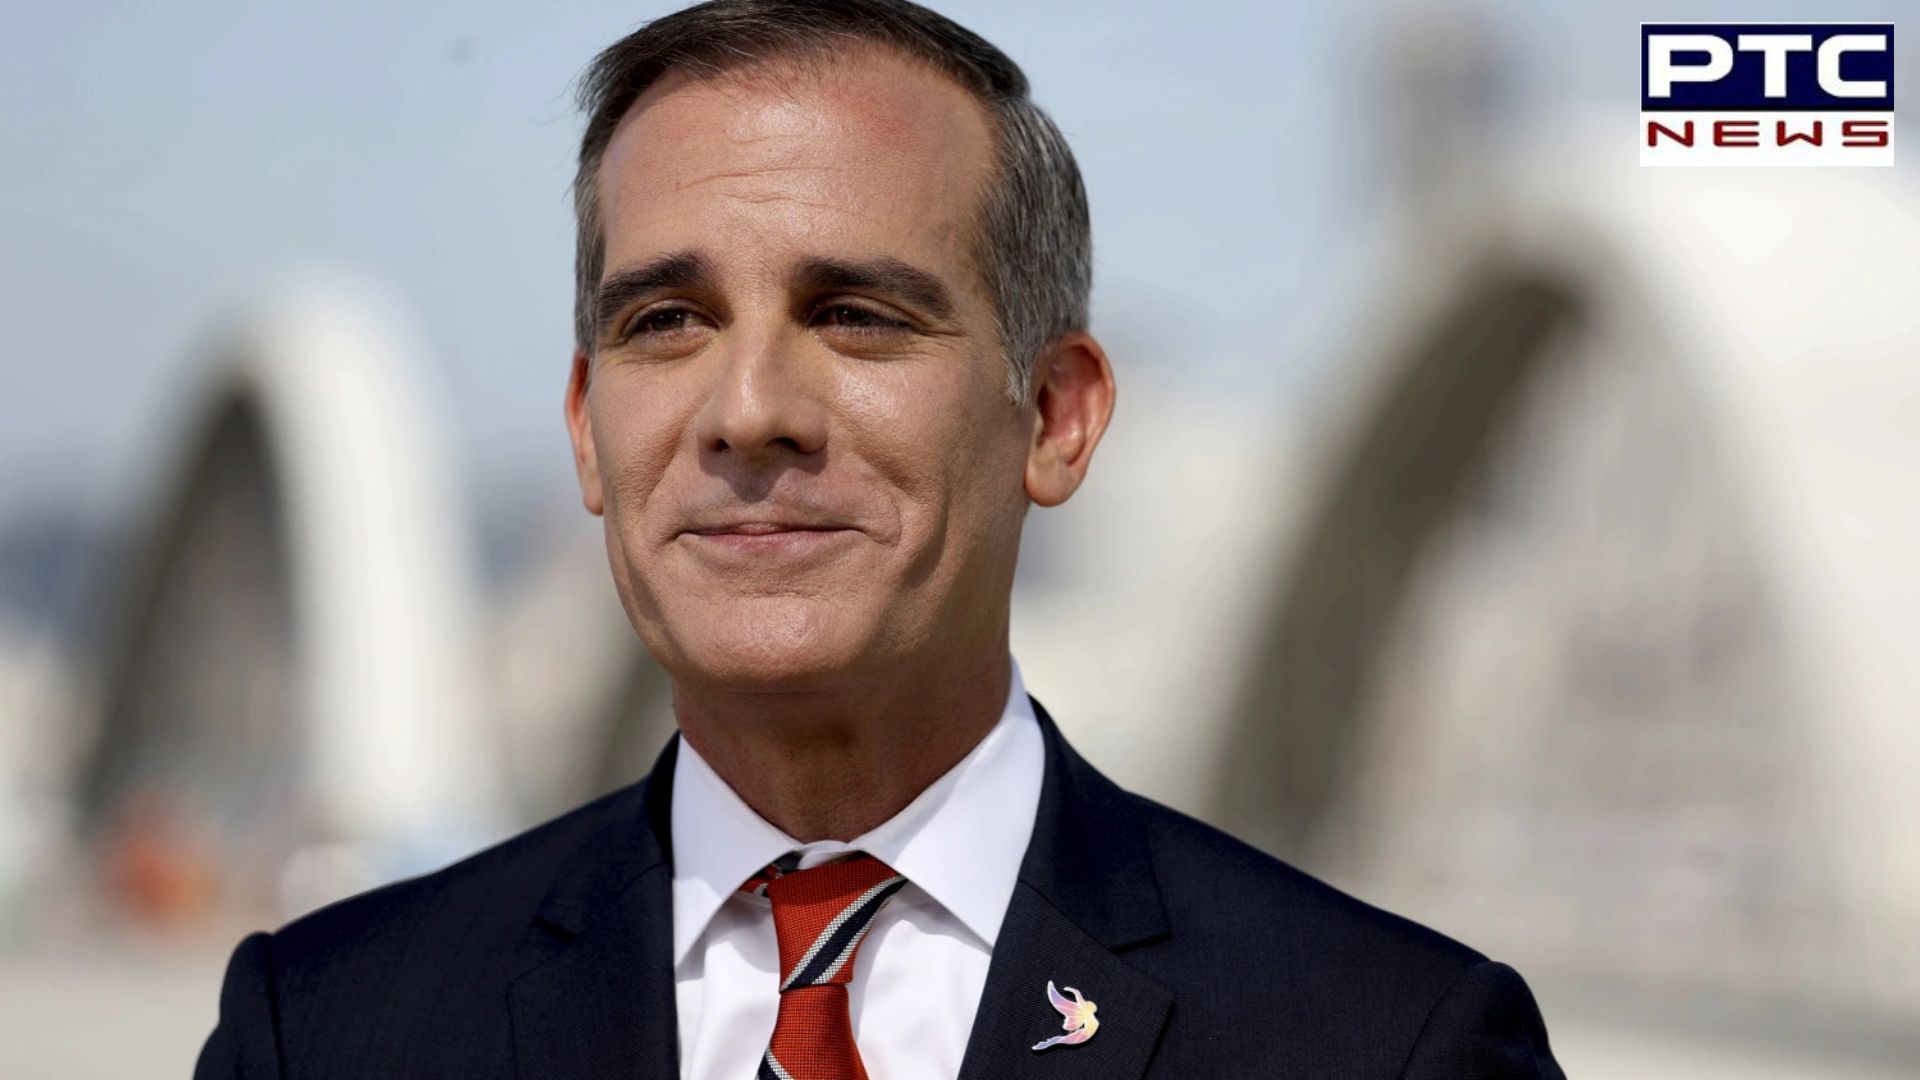 Safety concerns of Indian students in US: ‘We love and encourage Indian students,’ says Ambassador Eric Garcetti